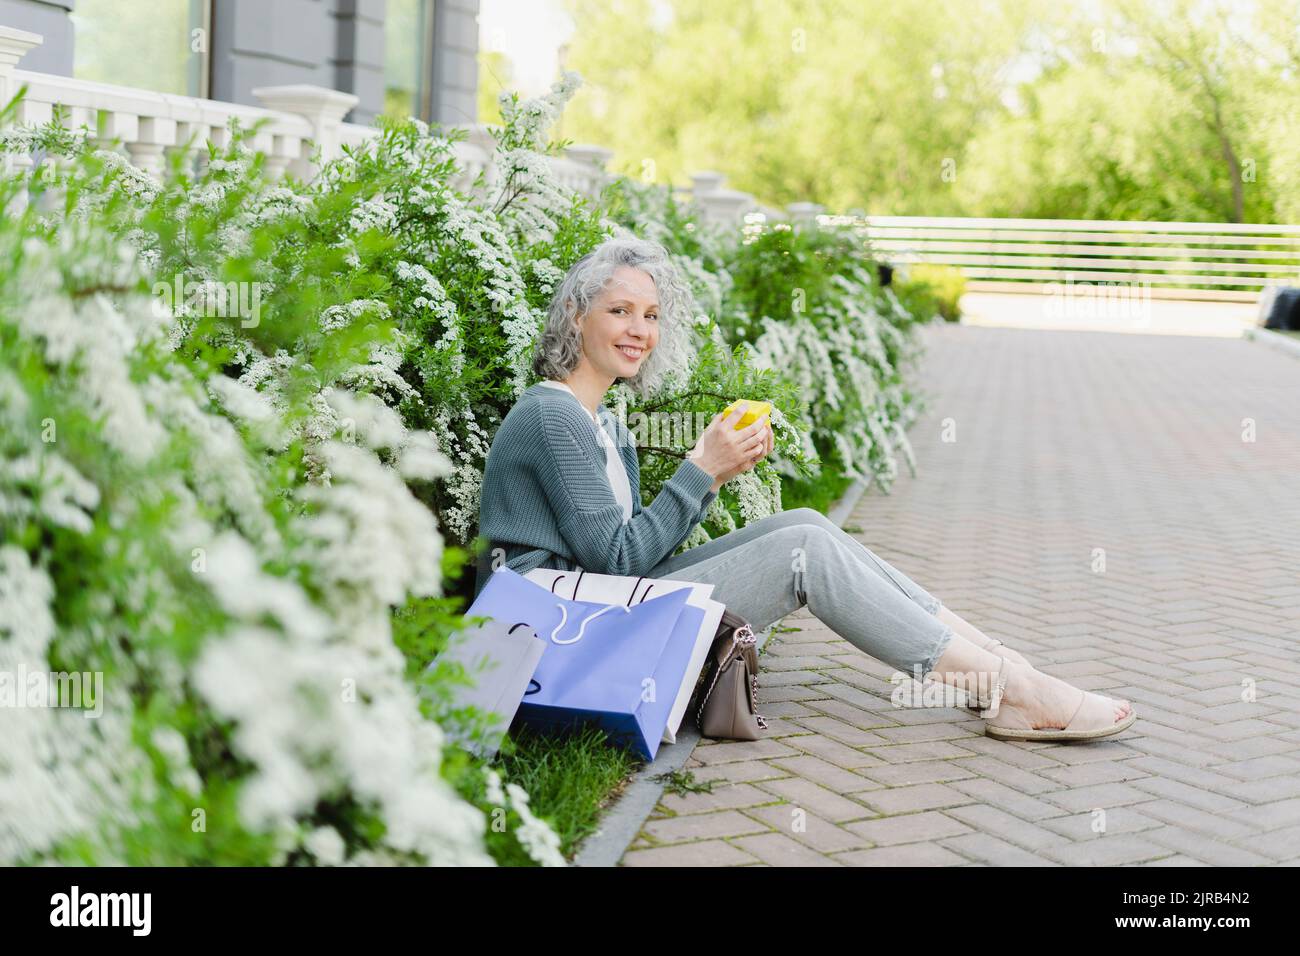 Smiling woman holding gift box sitting amidst plants Stock Photo